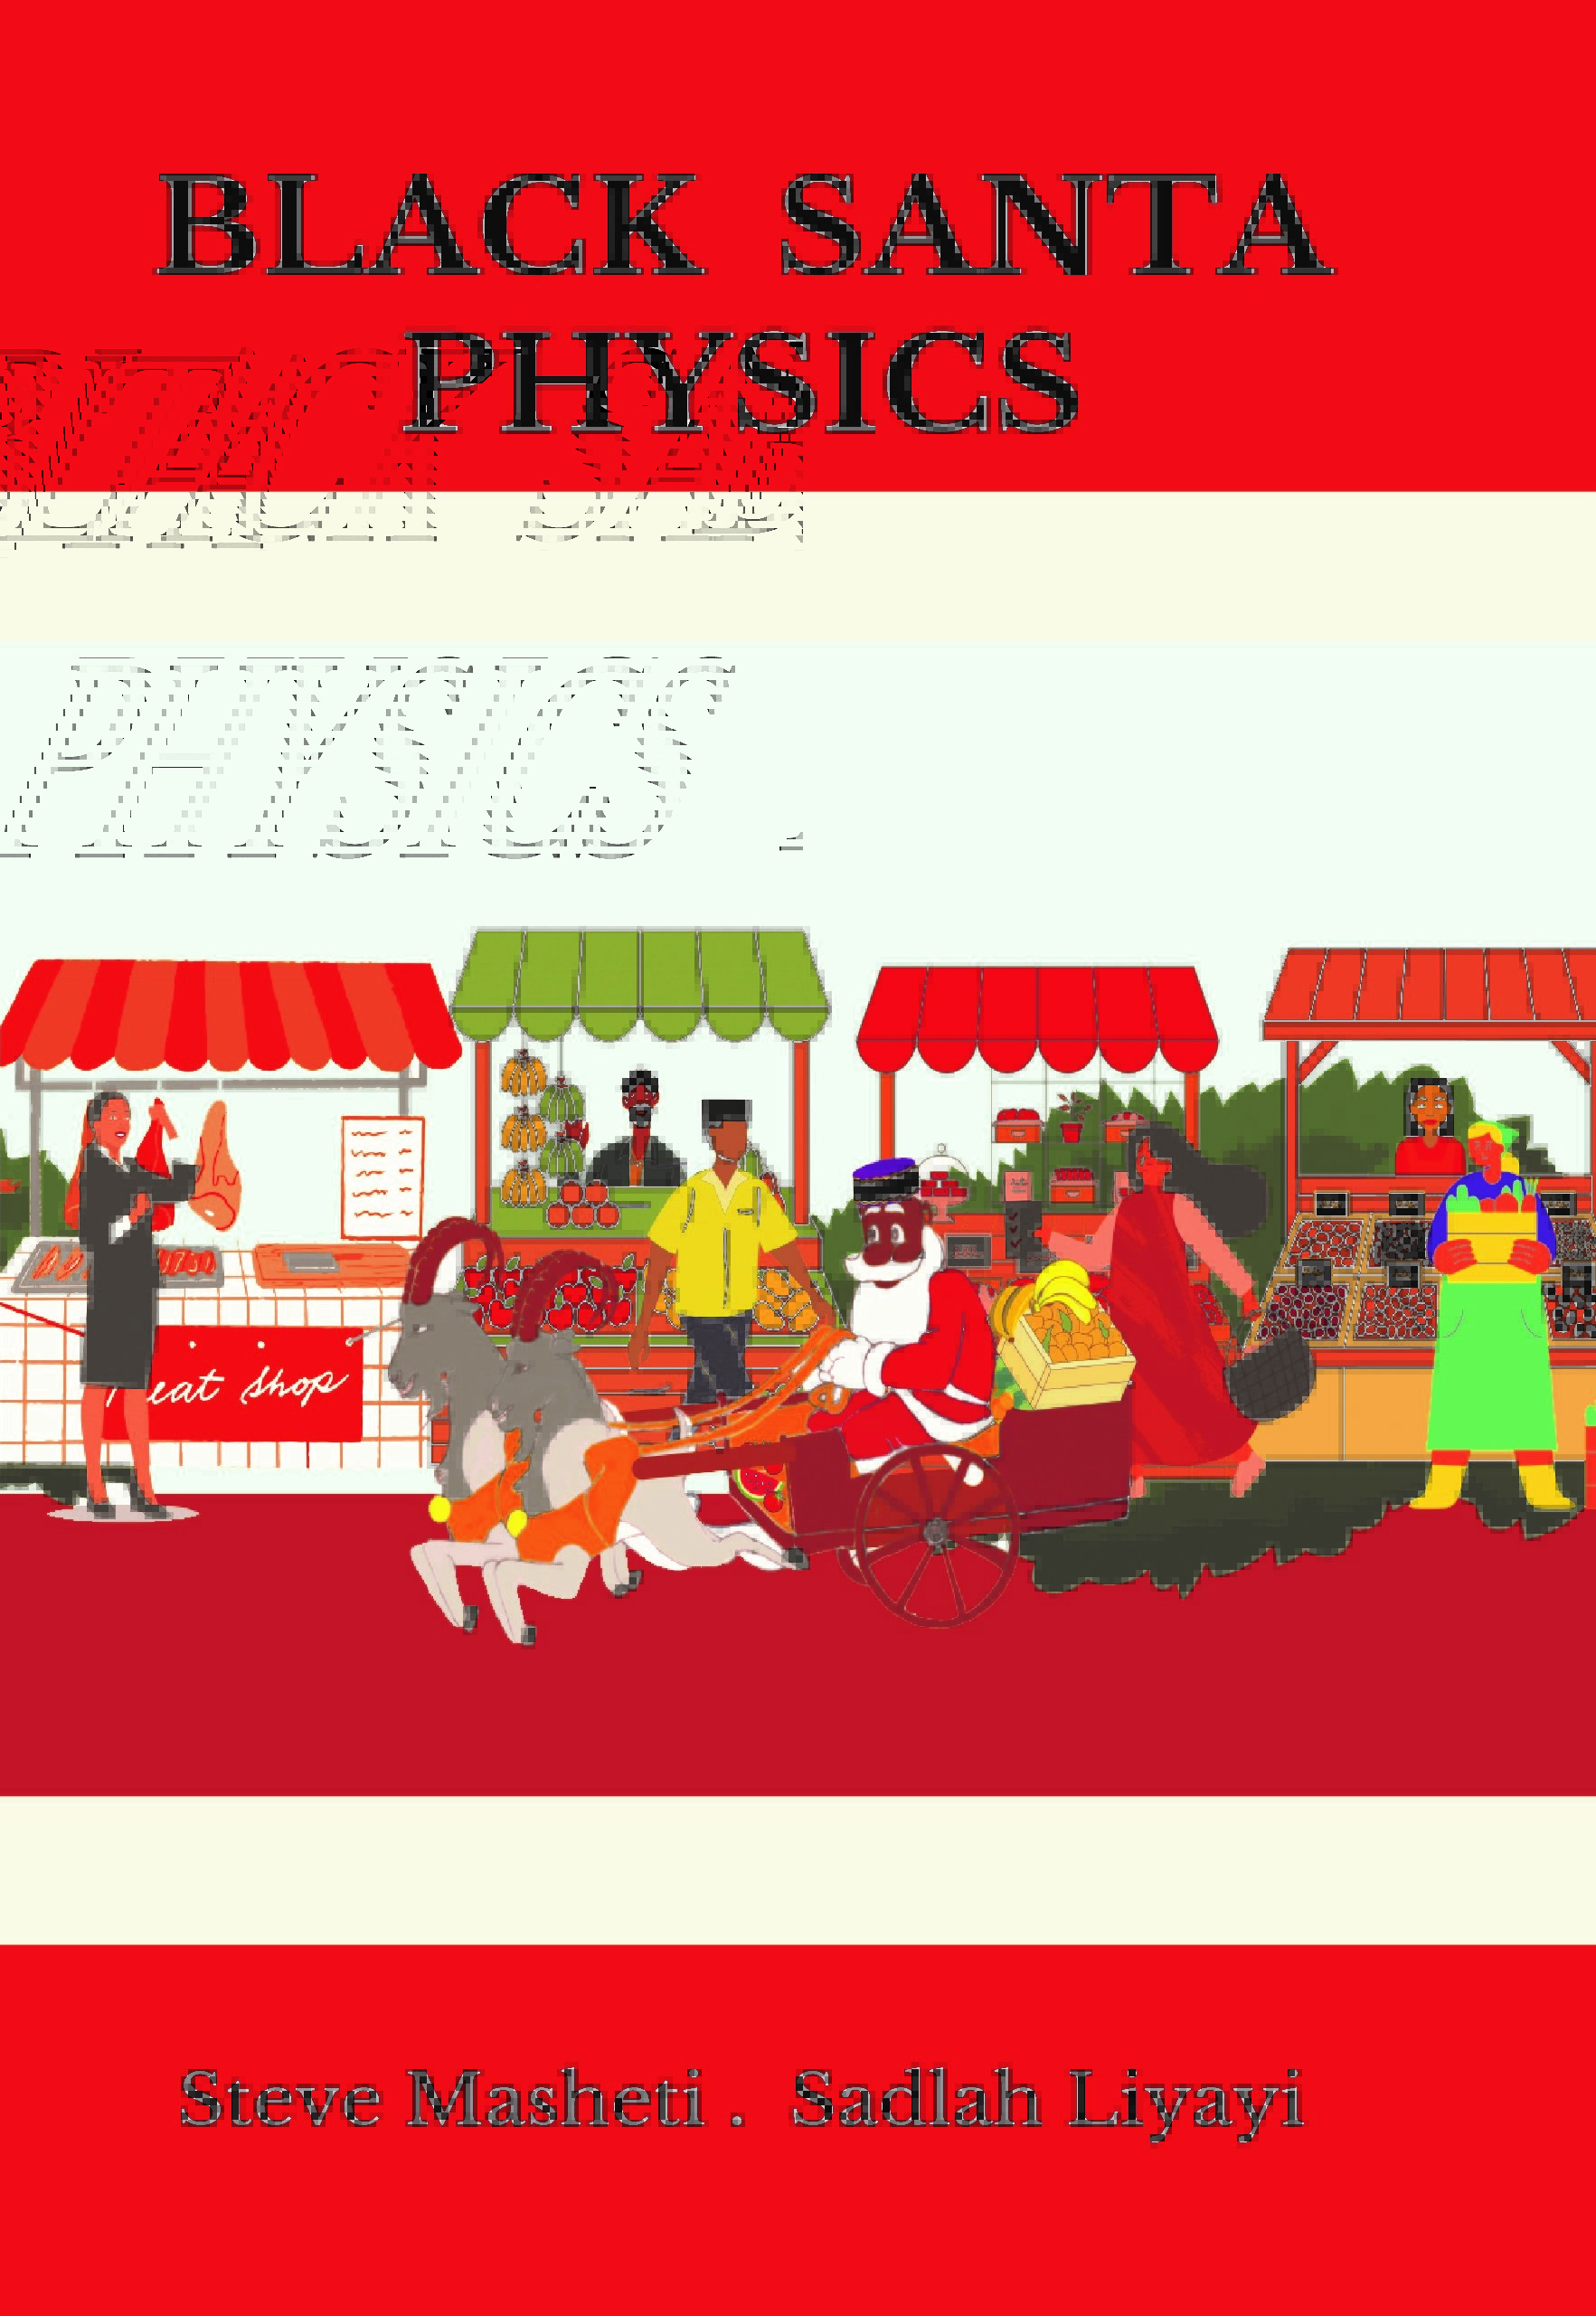 A Physics book that you will enjoy to read and learn from.